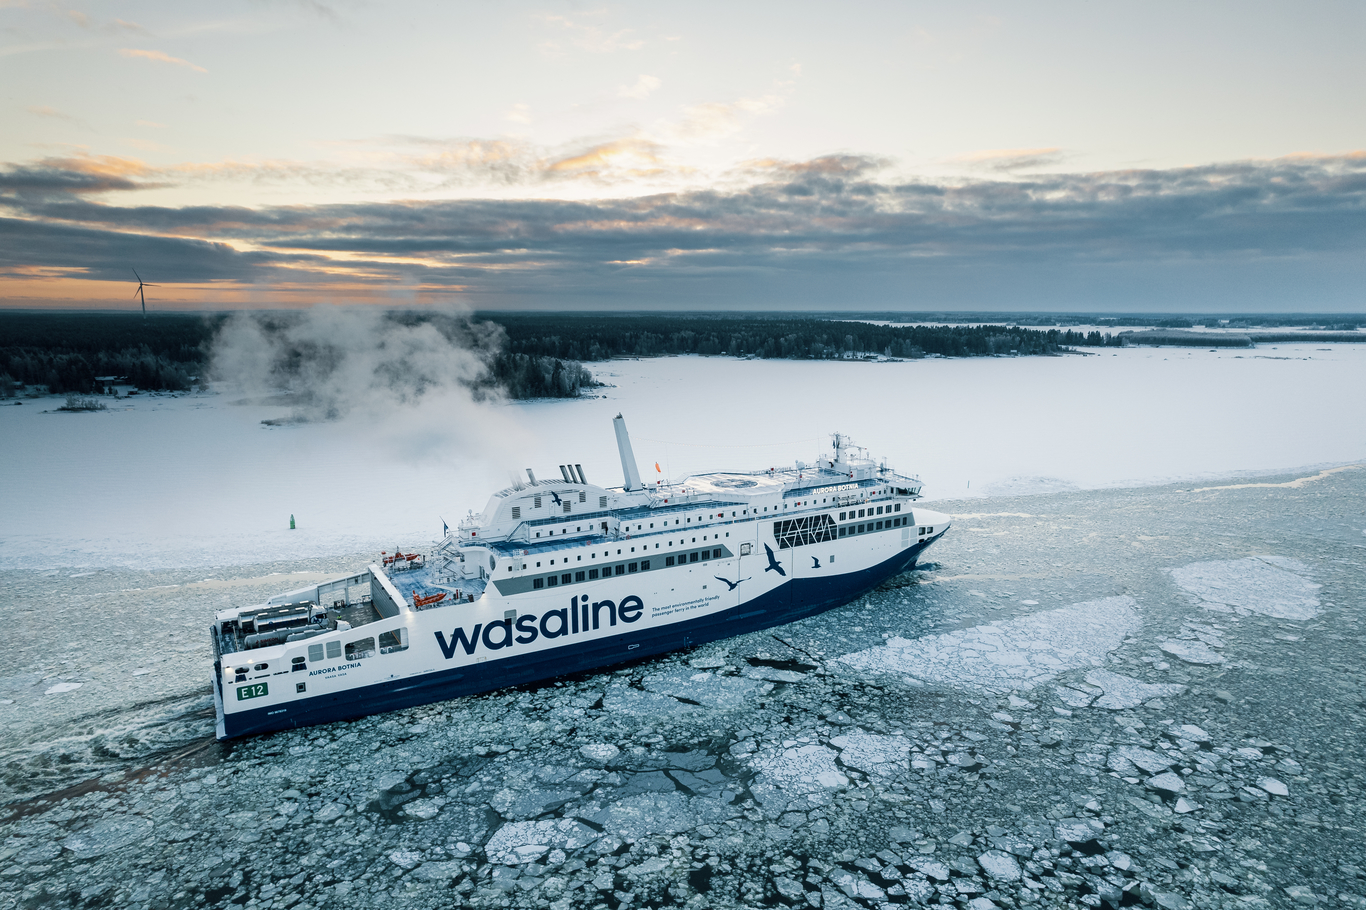 Ferry "Aurora Botnia" passing through ice on its trip between Vaasa (Finland) and Umeå (Sweden)